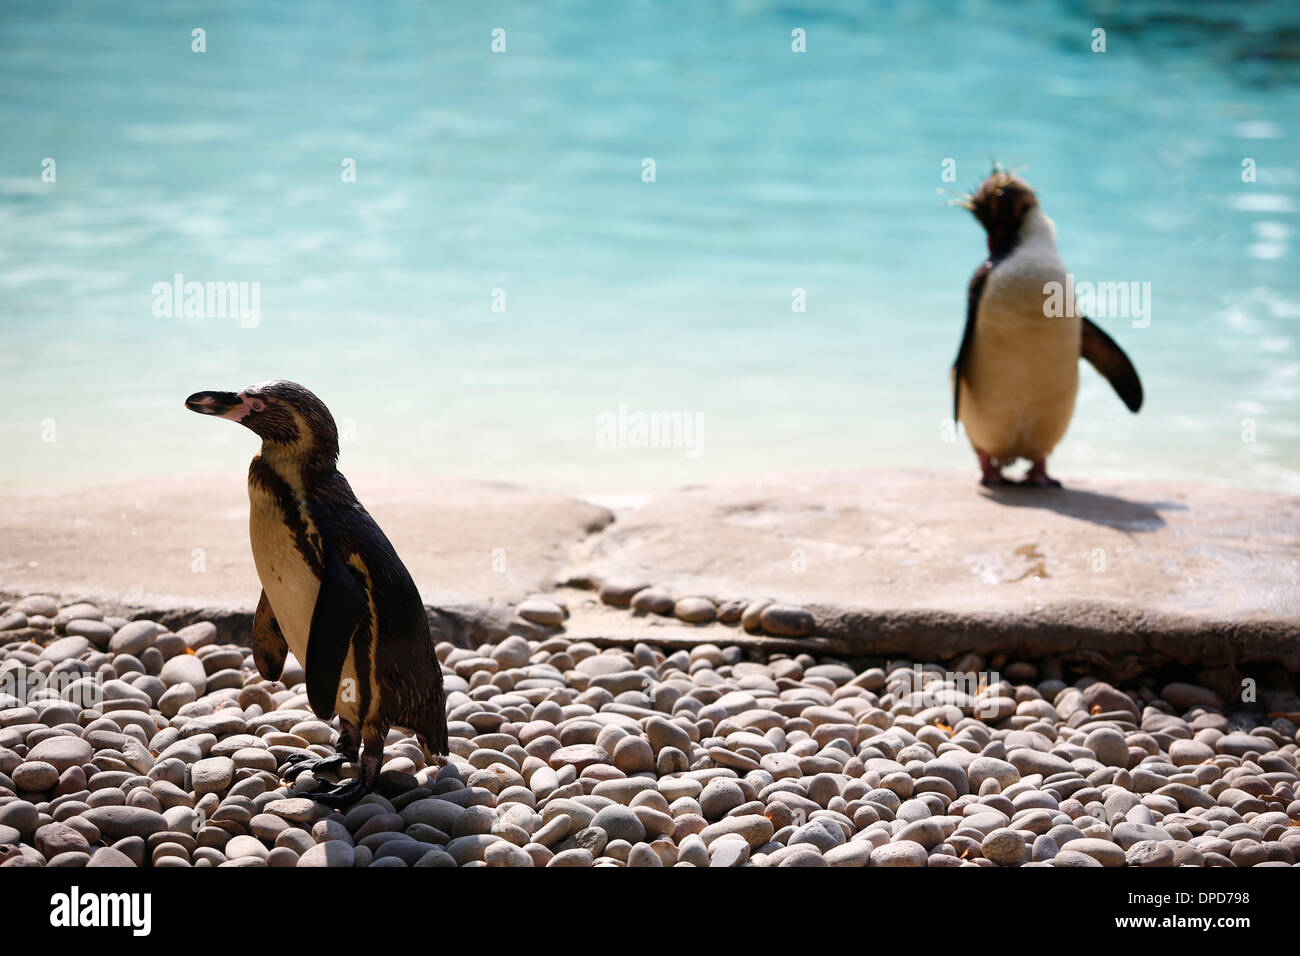 Penguins in ZSL London Zoo on July 17, 2013 in London, England. Stock Photo